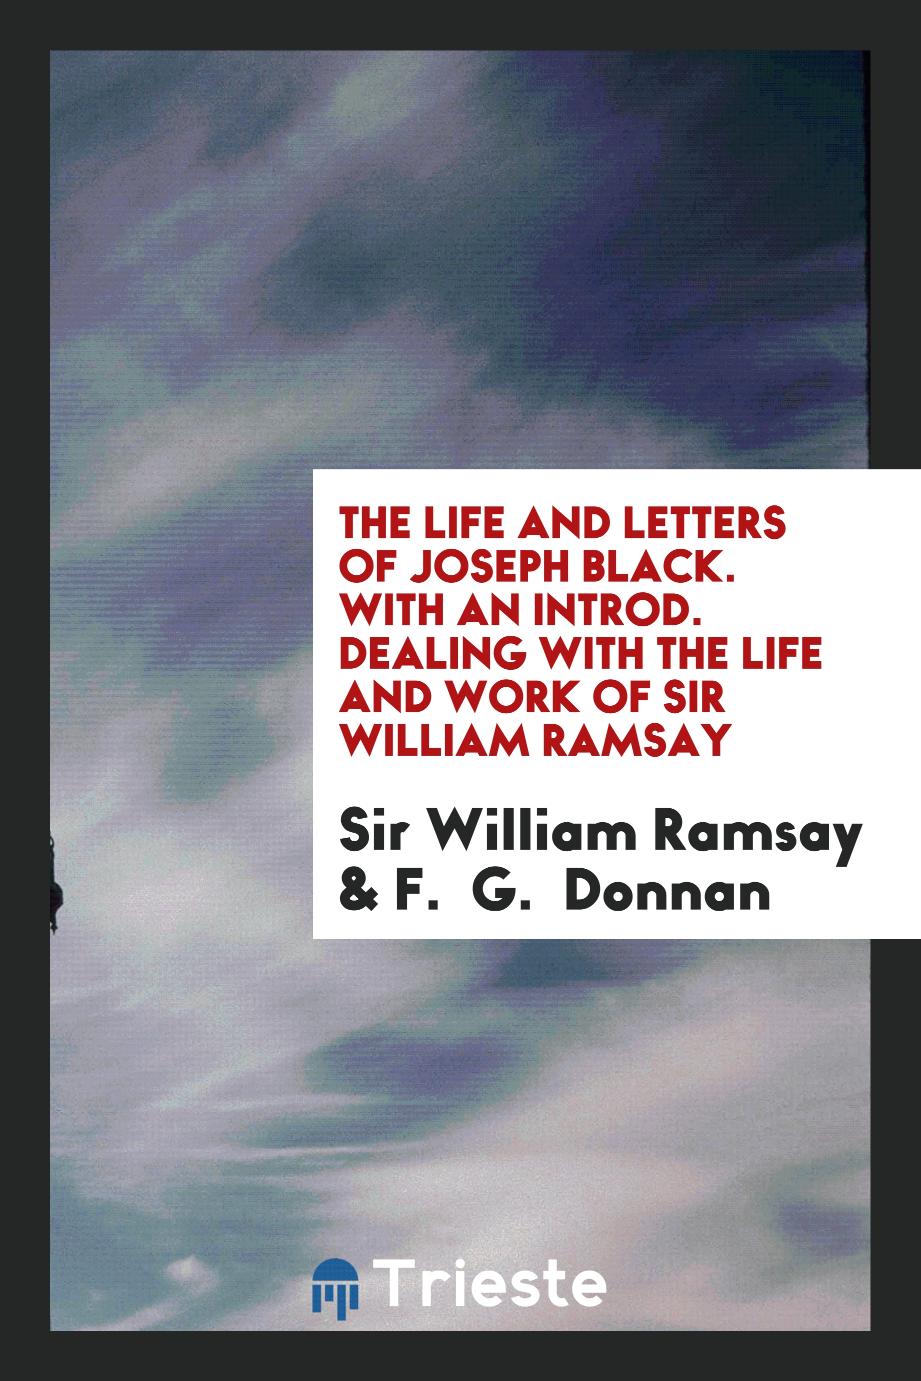 The life and letters of Joseph Black. With an introd. dealing with the life and work of Sir William Ramsay